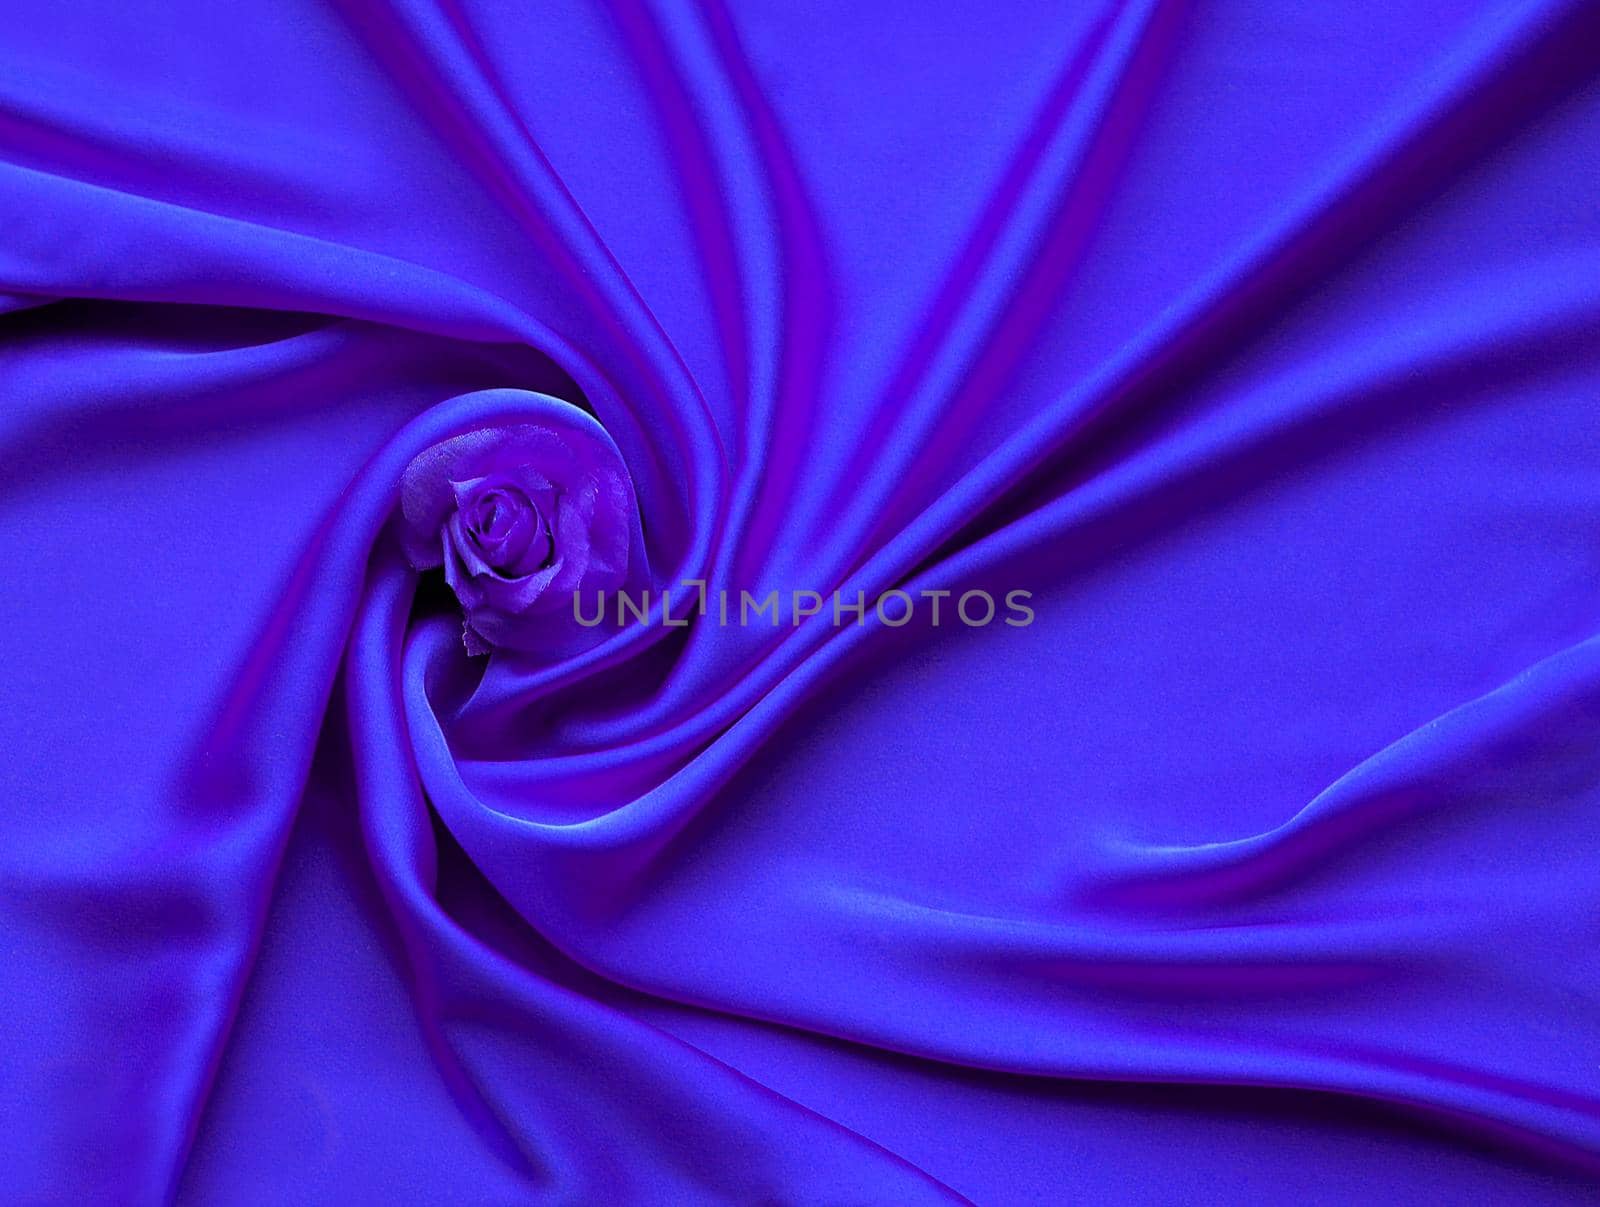 Blue electric Silk And Rose Petals. rose on a silk textured abstract background. Valentines day copy space for a text. Smooth and elegant satin texture with rose flower. Luxury material waves, wavy pink folds by julija